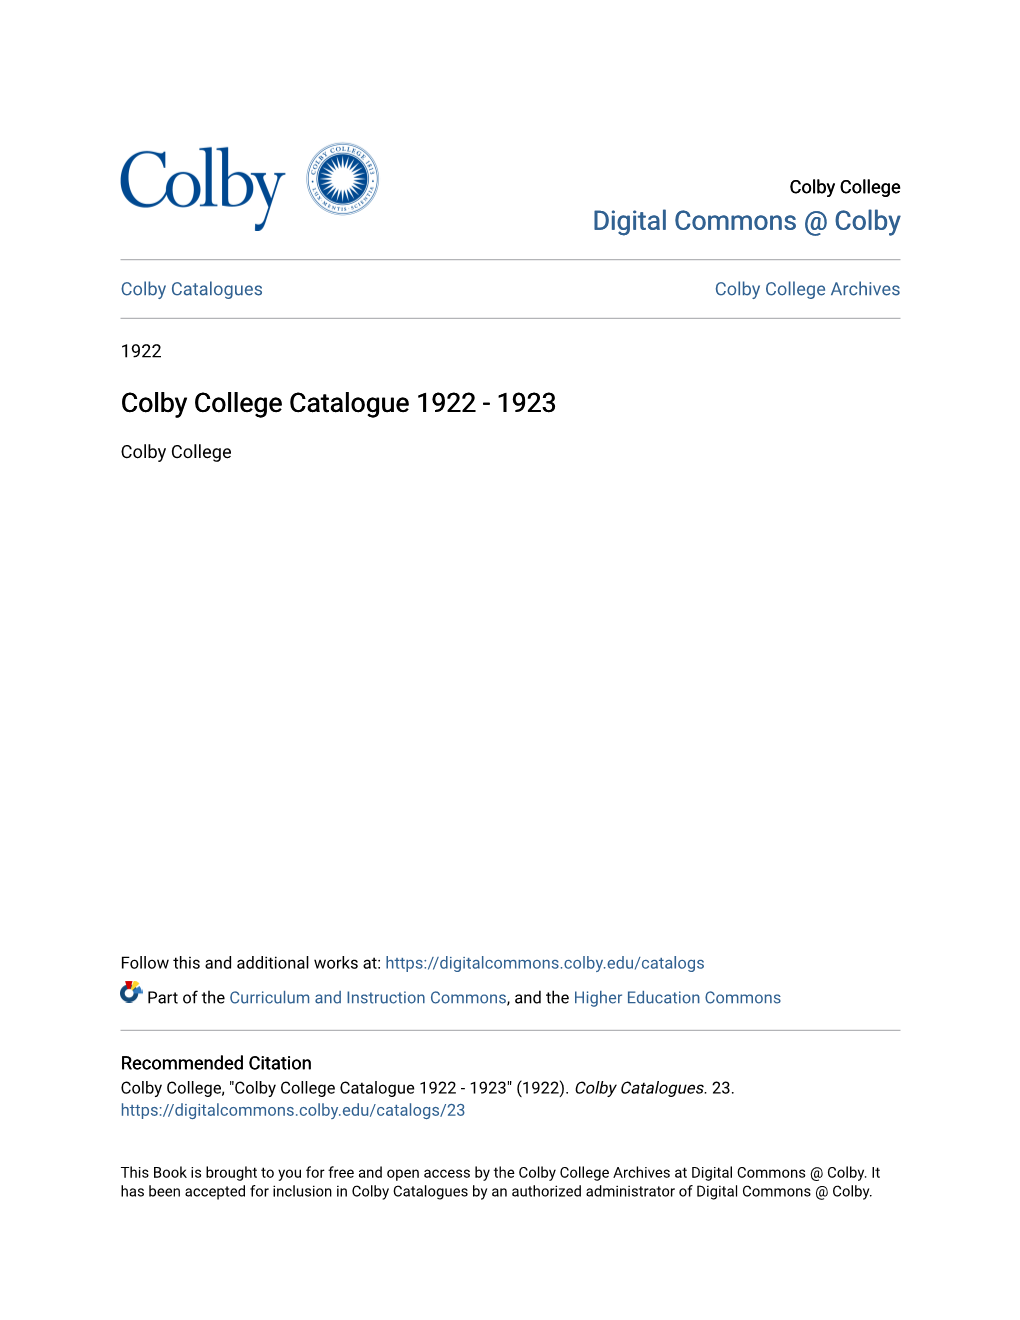 Colby College Catalogue 1922 - 1923